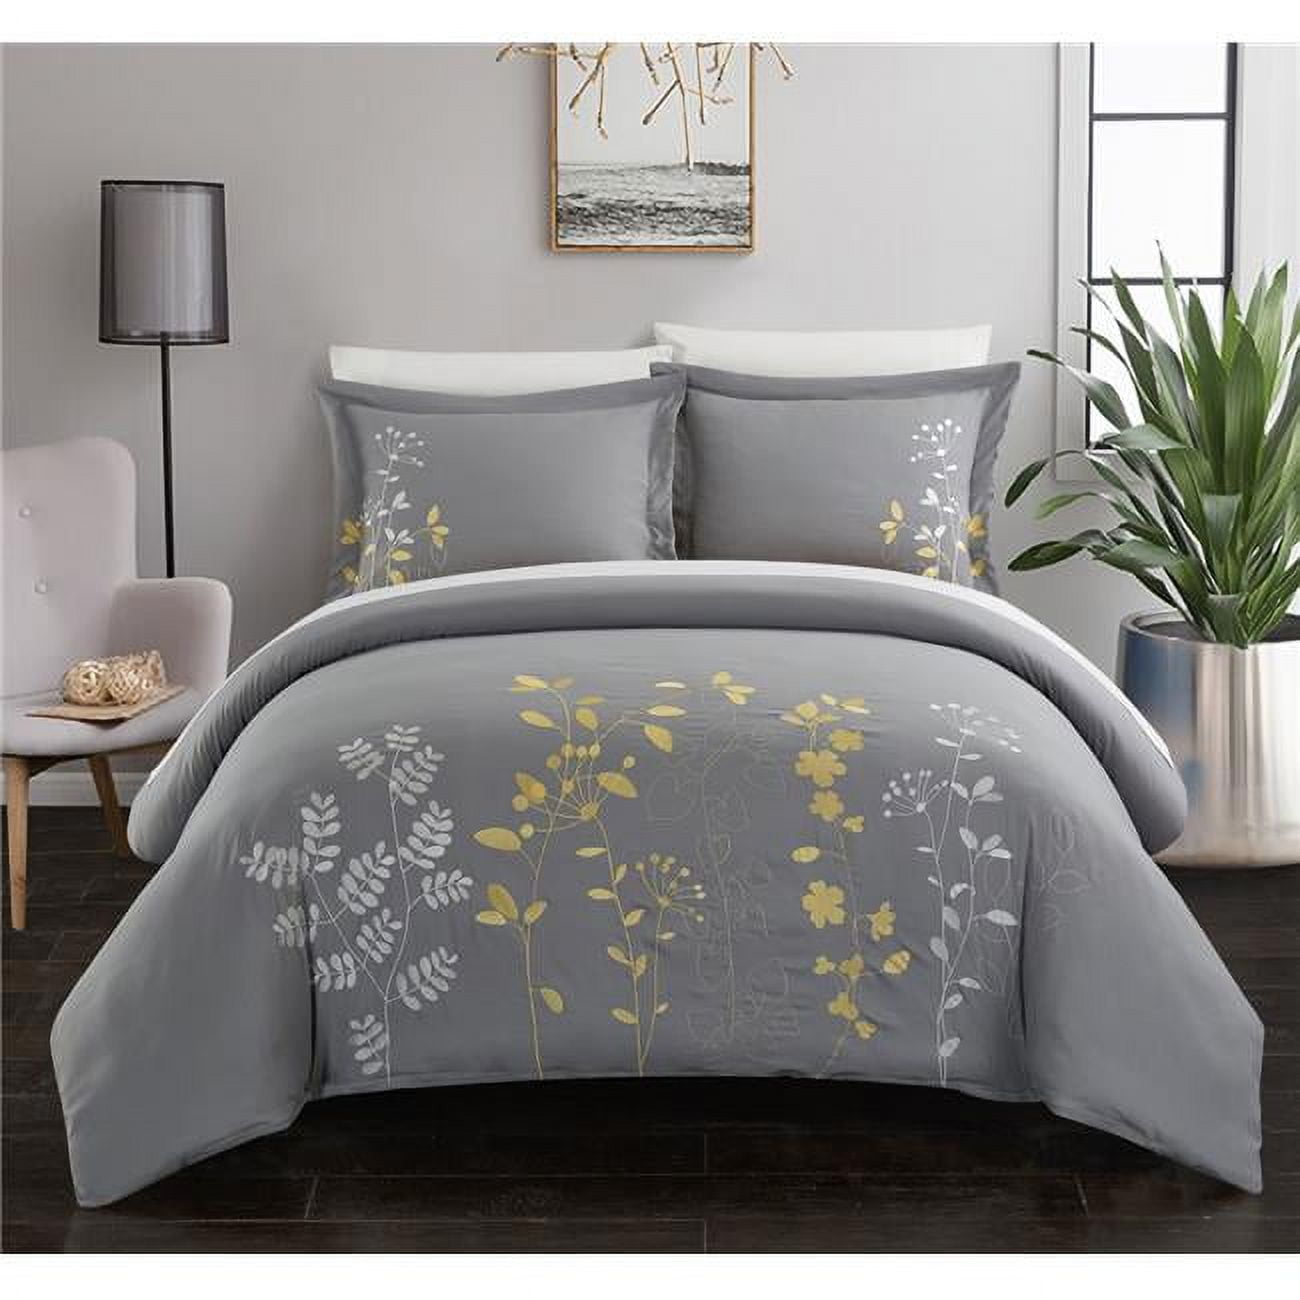 Bds00569-us King Size Kylie Duvet Embroidered Floral Design Backing Zipper Closure Bedding & Decorative Pillow Shams Included, Yellow - 3 Piece